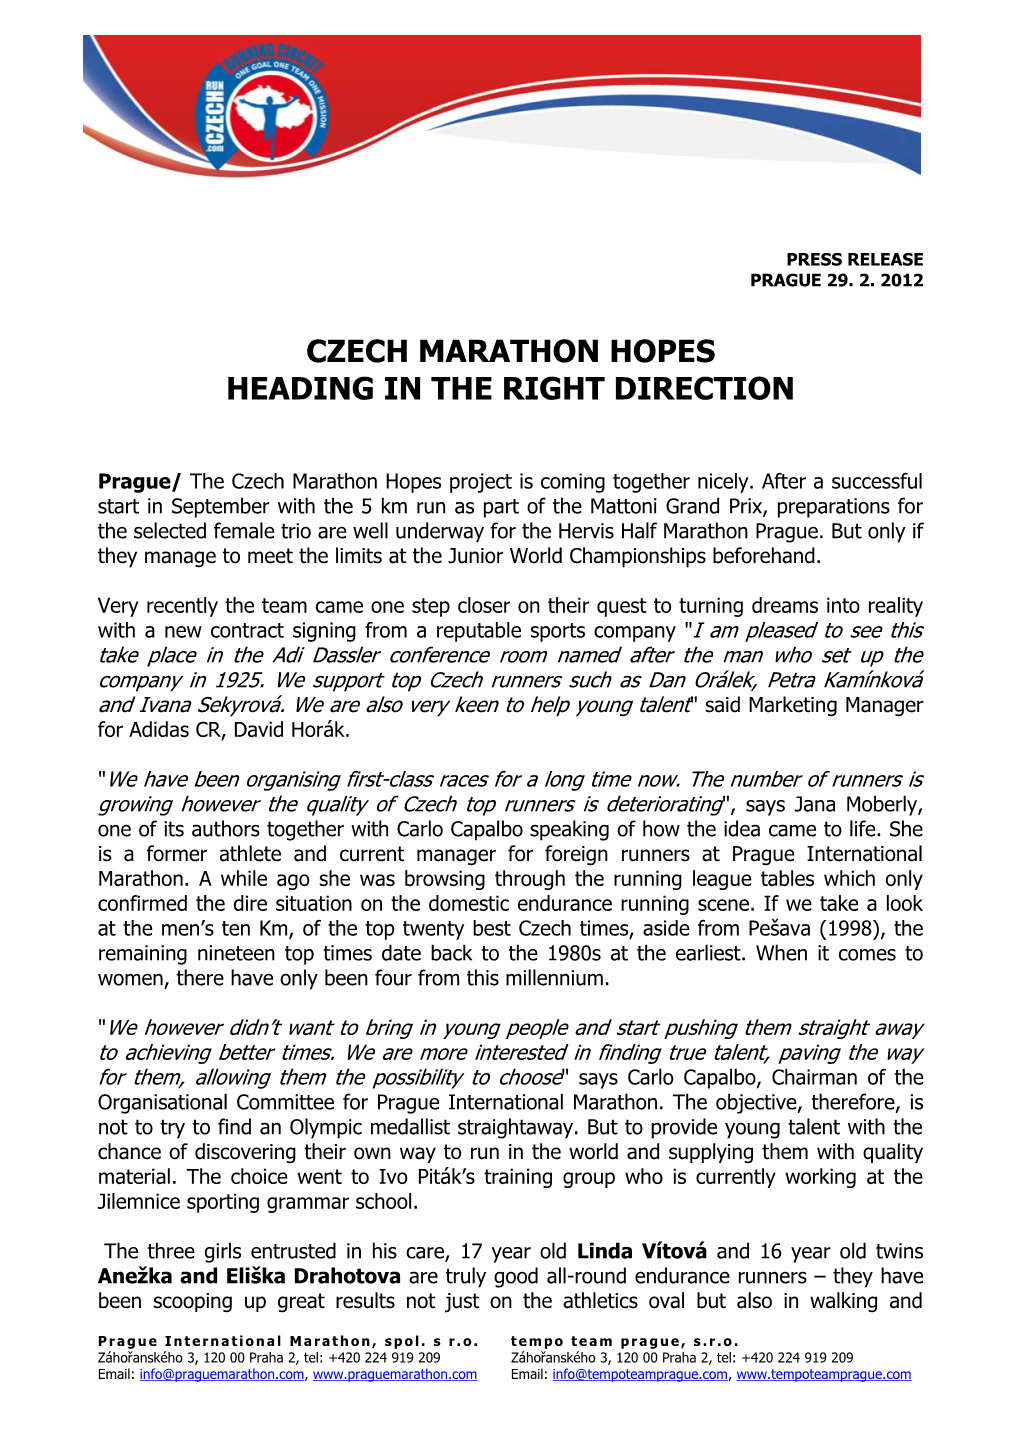 Czech Marathon Hopes Heading in the Right Direction